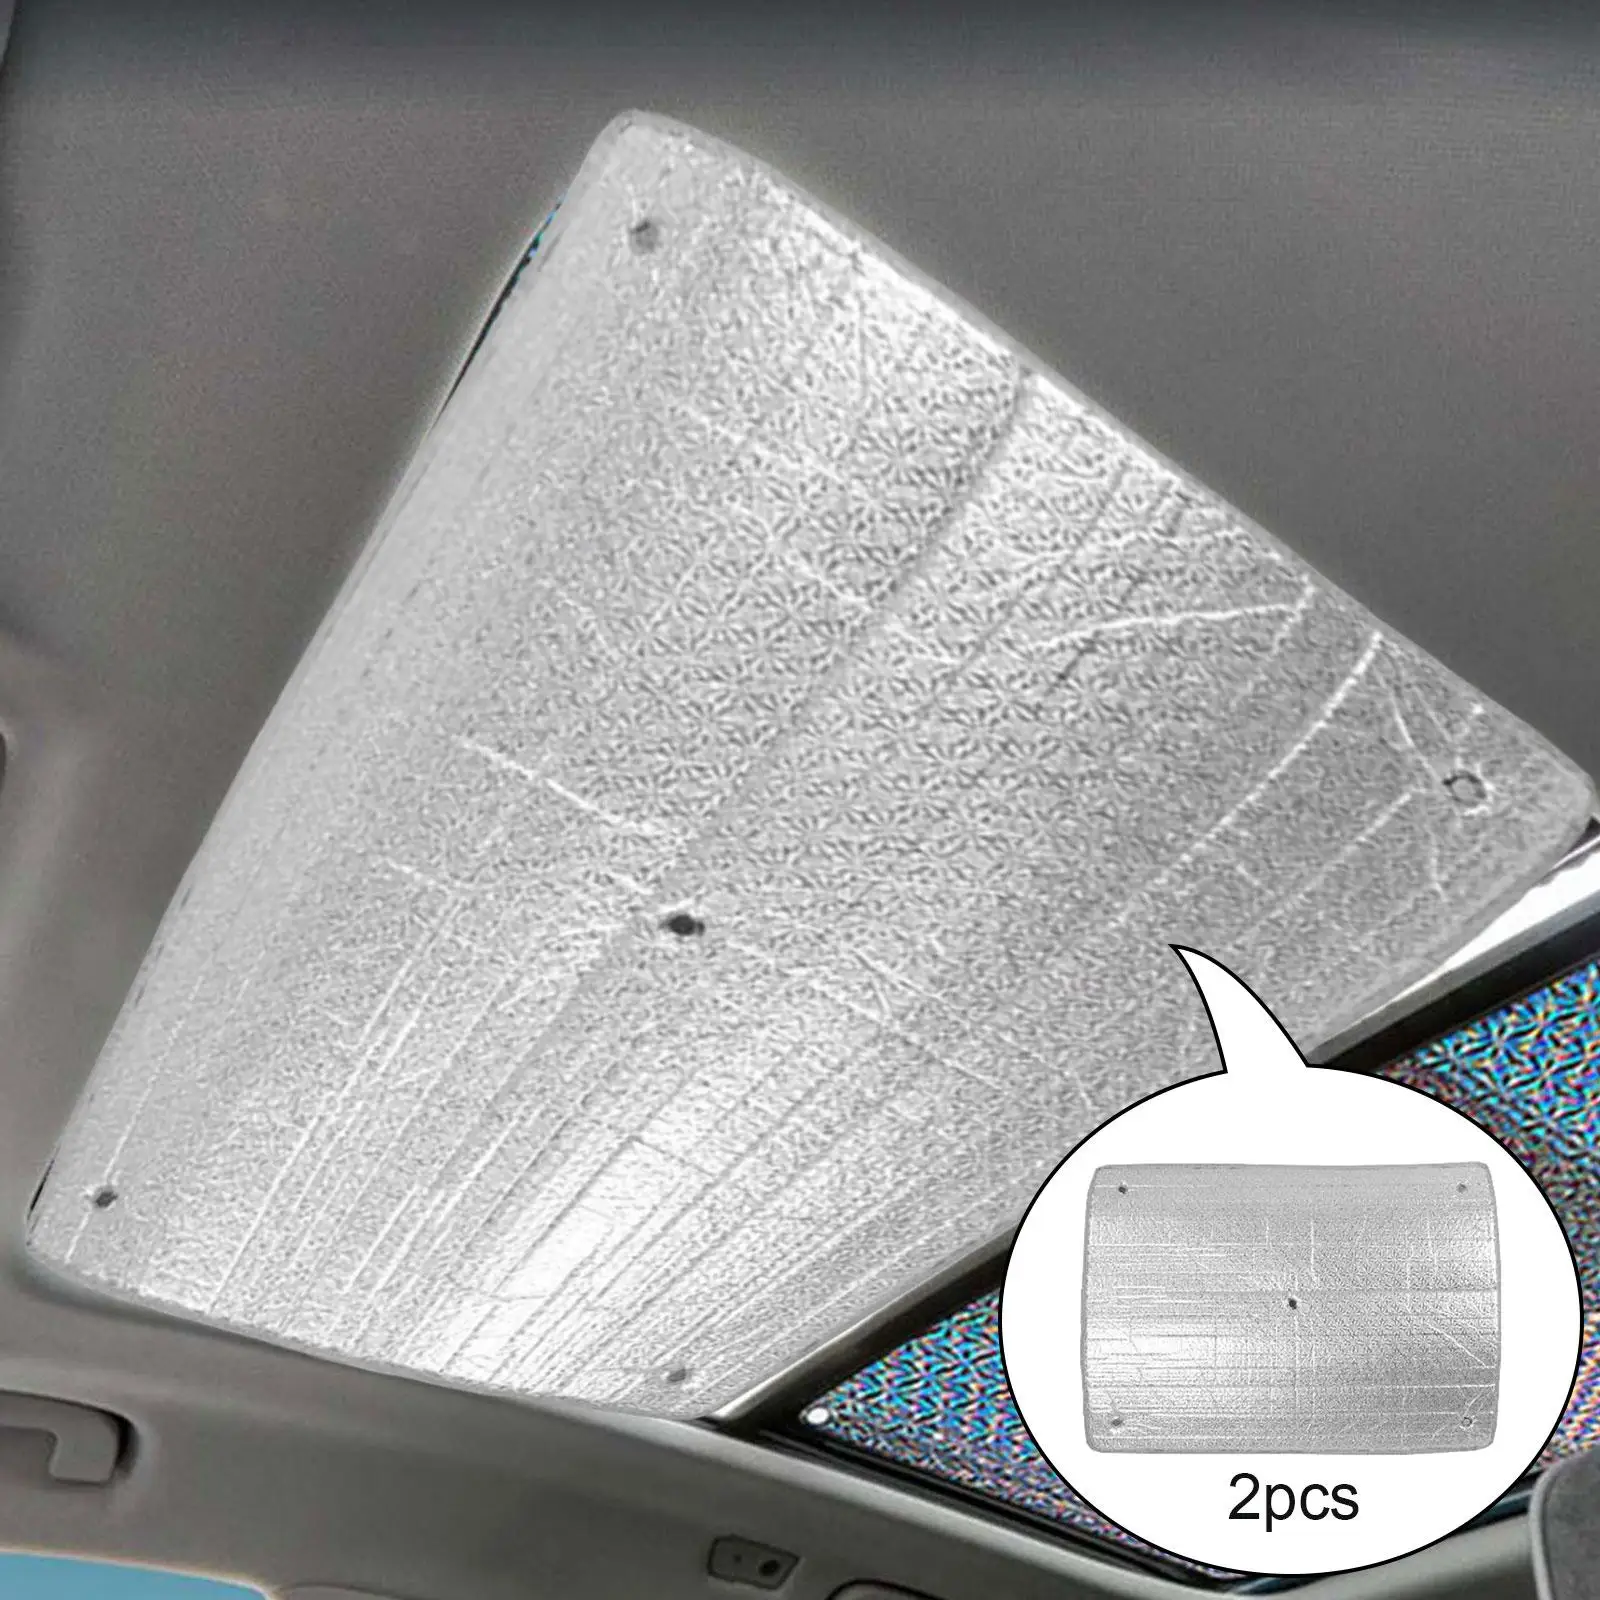 2x Sunroof Sunshade Window Sunshades for Byd Atto 3 Yuan Plus Easily Foldable and Stored Avoid Sun Exposure Easily Install